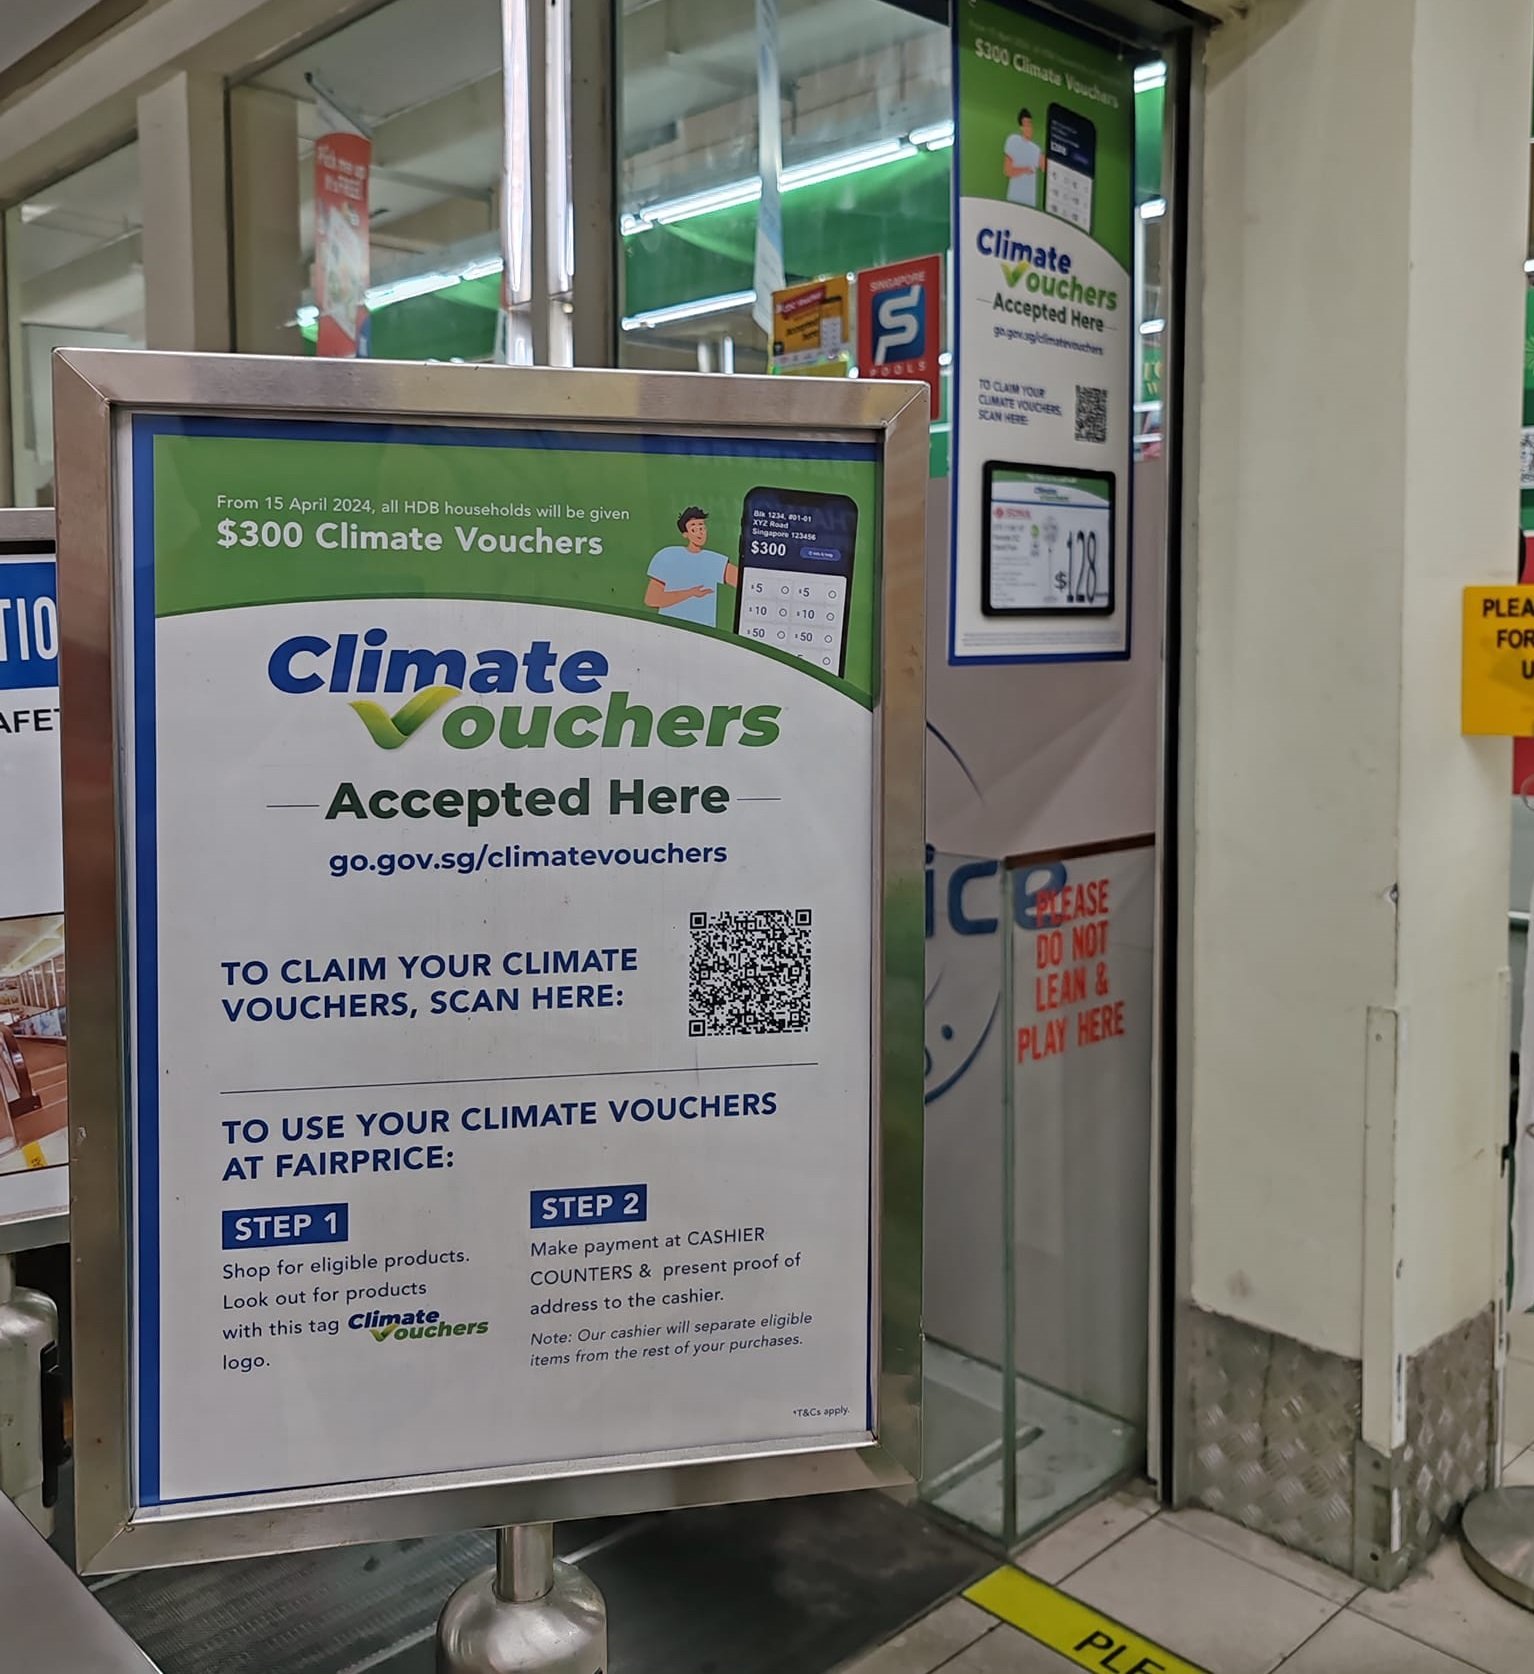 S$300 Climate Vouchers can be claimed from today & redeemed on products with relevant label